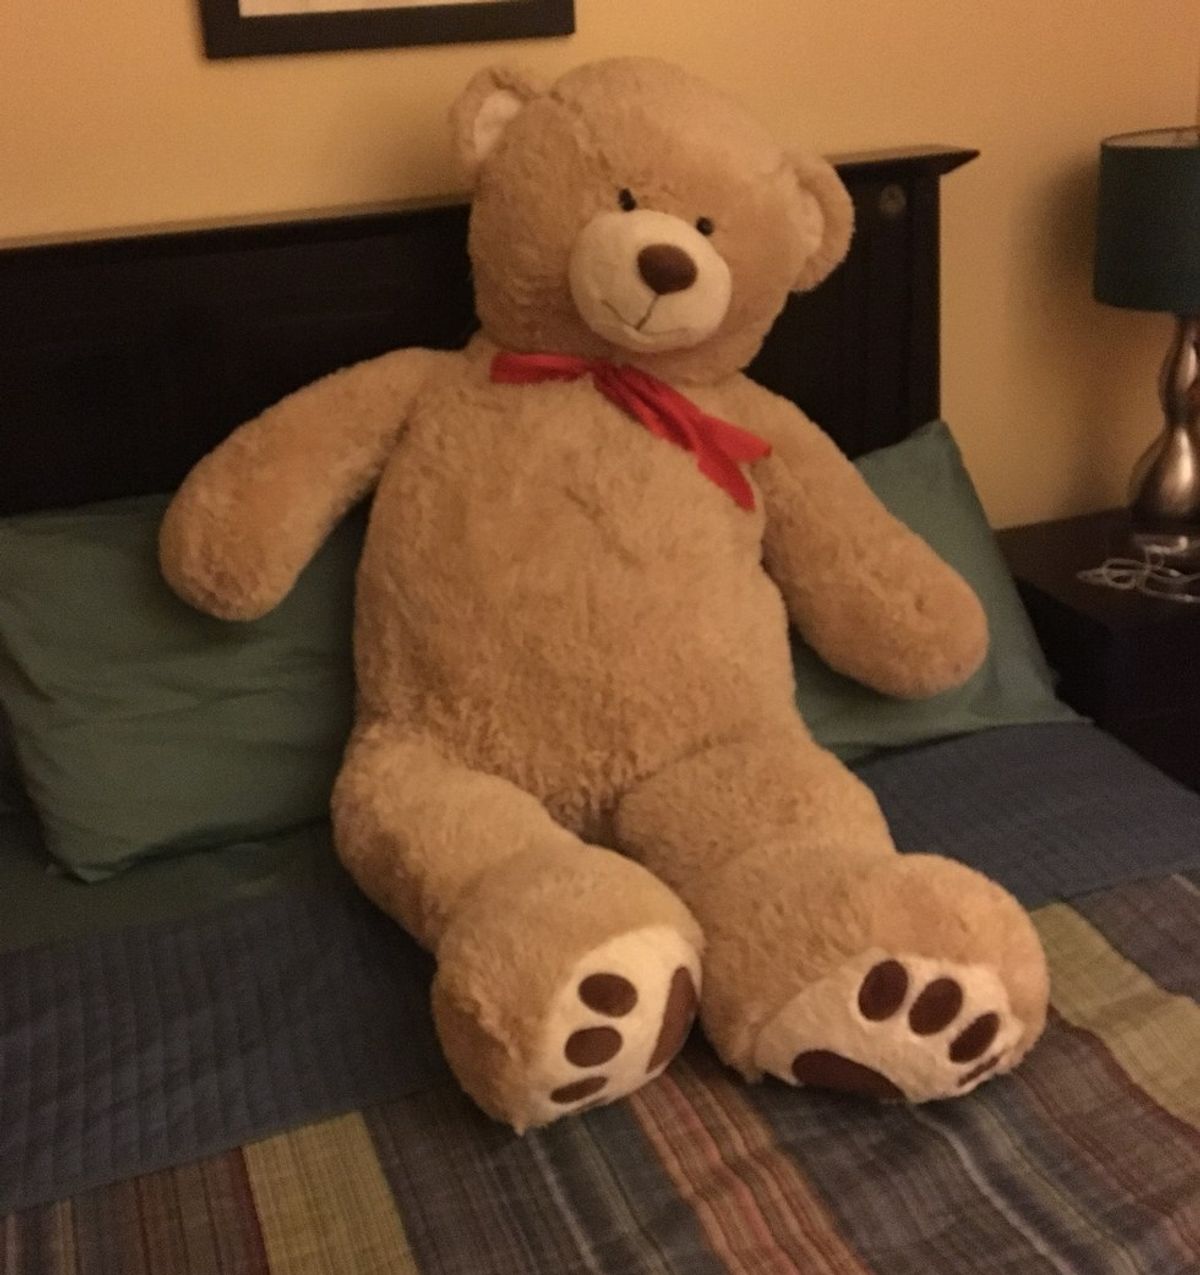 8 1/2 Reasons Why A Life-sized Teddy Bear Should've Been On Your Holiday Wish List